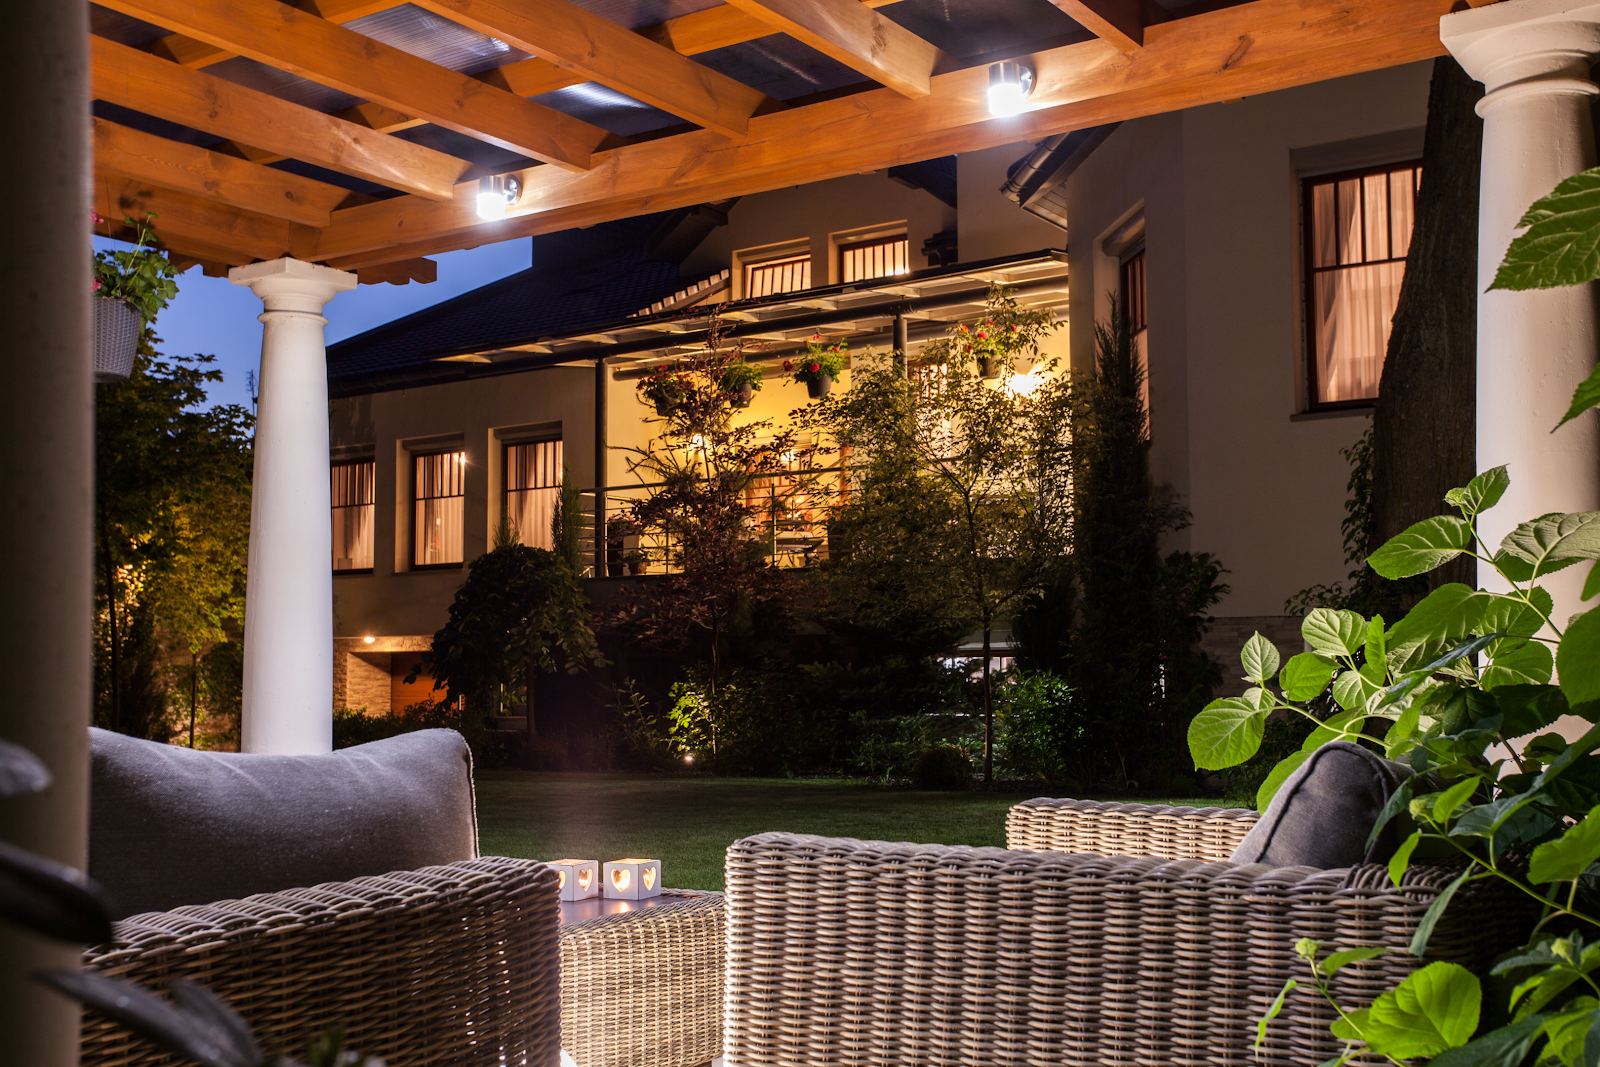 Installing mood lighting is an easy way to create a glow that sets the mood of your alfresco area.